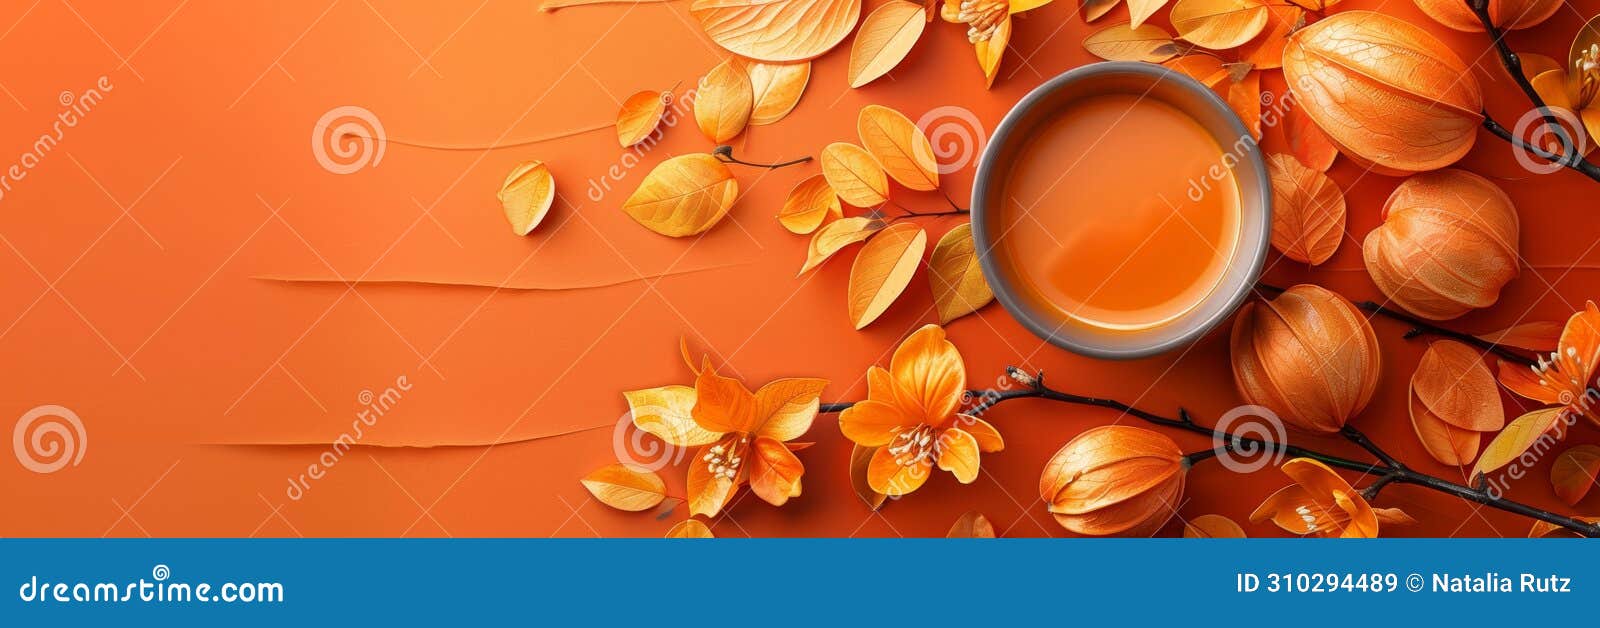 golden cape gooseberries on an orange background with a cup of tea